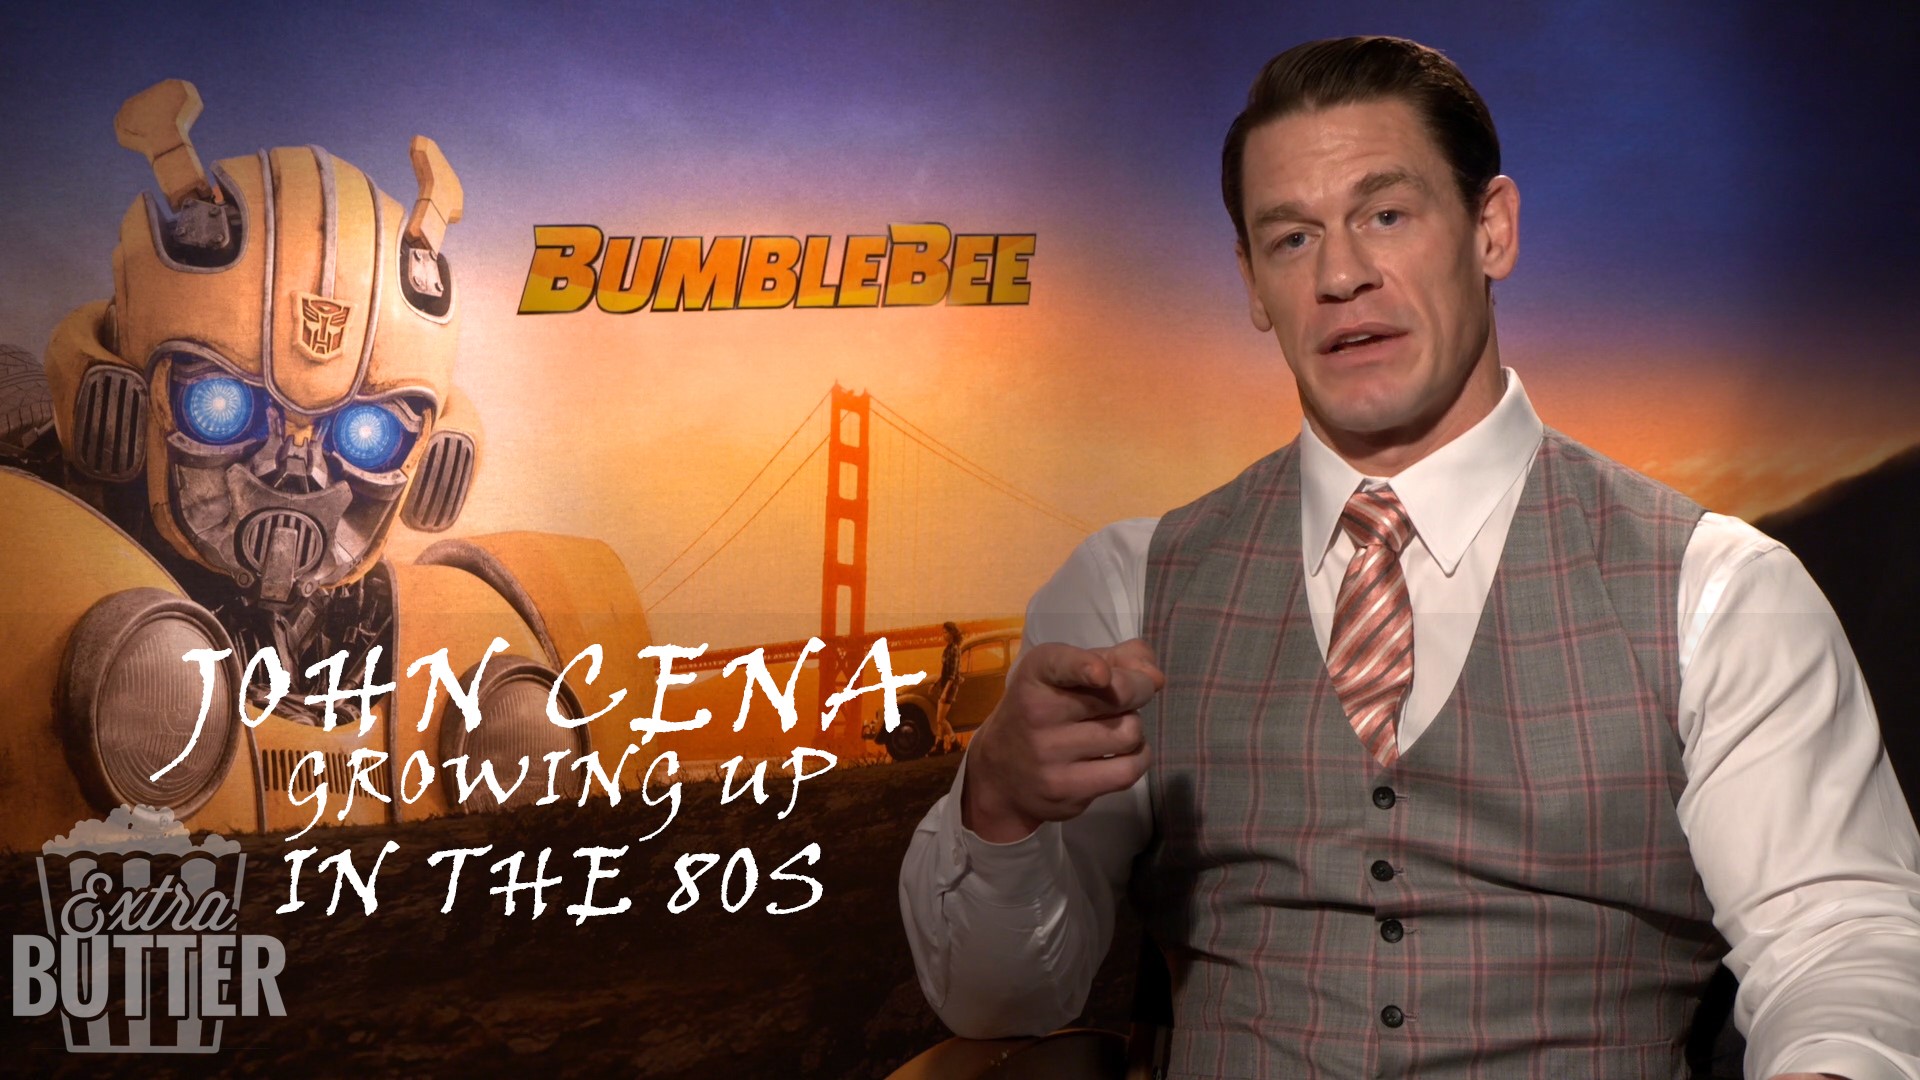 John Cena talks about the new movie "Bumblebee" with Mark S. Allen. John also shares his favorite 80s things, including Nintendo cereal, Tom & Jerry, Transformers, WWF animated, and his love of cars. He also talks about what wrestling taught him about acting in action movies. Watch Extra Butter every Friday morning at 9:30 a.m. on ABC10. Interview provided by Paramount Pictures.